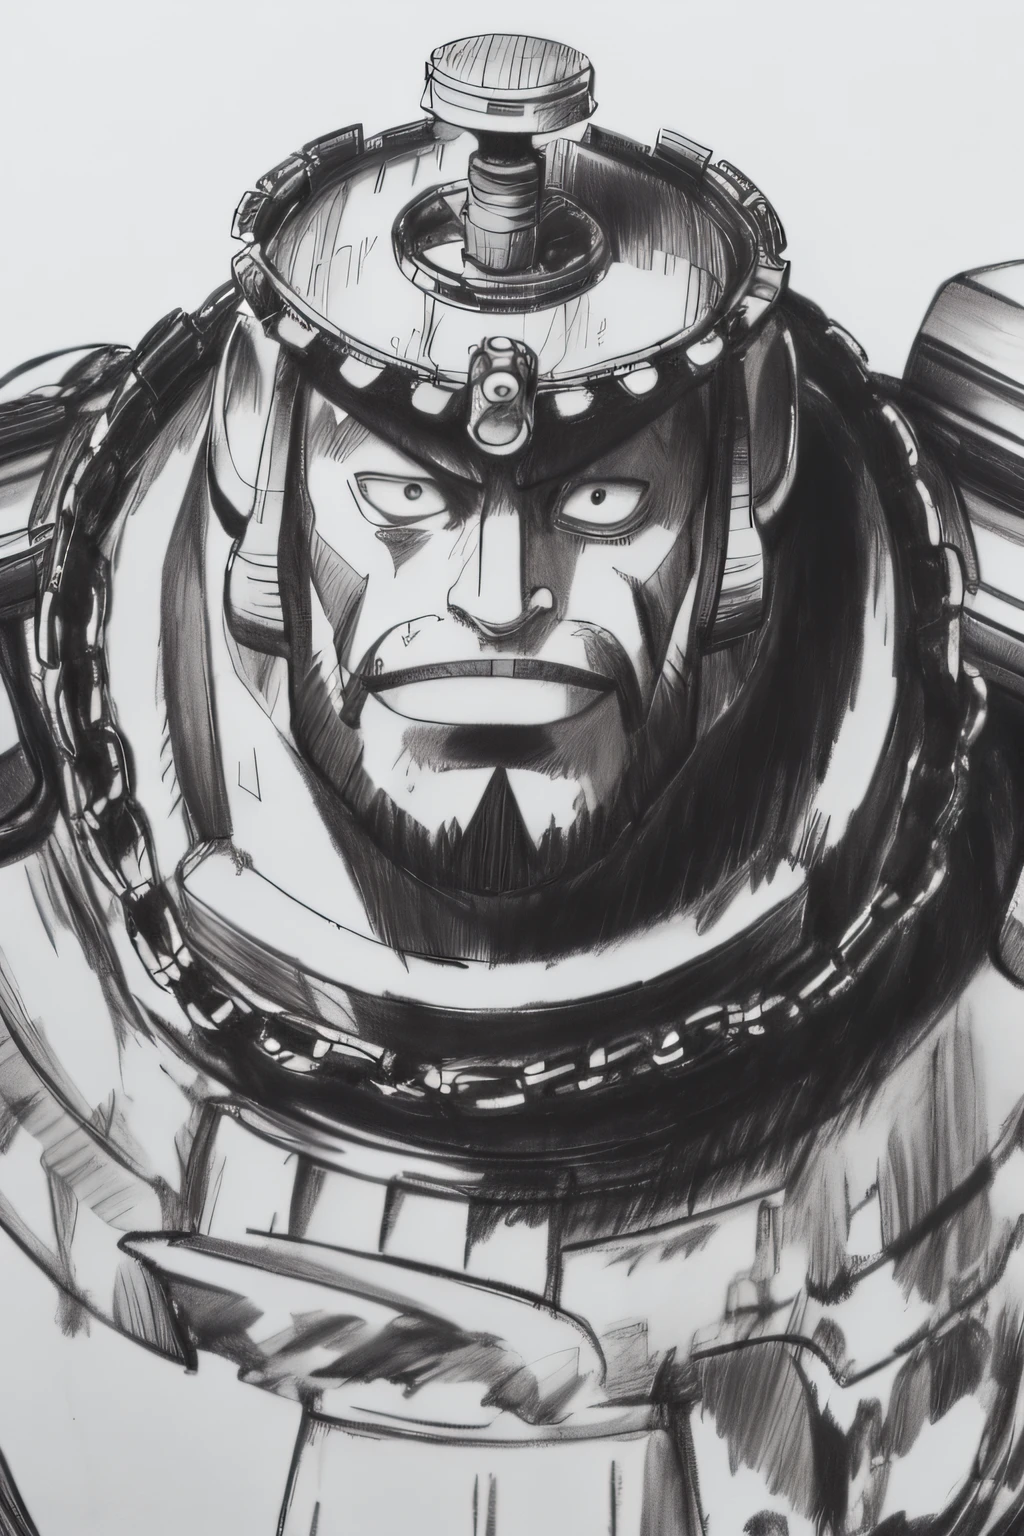 A mesmerizing greyscale pencil drawing capturing the charismatic Franky from the anime One Piece, depicted in a detailed portrait with a sketch extending to his torso. Franky is portrayed wearing an intricate steampunk-inspired attire, adorned with gears, chains, and mechanical embellishments that showcase his mechanical prowess. The sketch showcases the fine details of his steampunk dress and the meticulous shading that brings depth to his form. The drawing is rendered in 4K HDR, allowing for stunning visual clarity and contrast. Franky's vibrant personality and strong presence are conveyed through the expressive and detailed pencil strokes. The background is kept minimal, drawing attention to Franky and the captivating steampunk aesthetics of his attire. Style: Detailed pencil drawing with a focus on precise linework, shading, and texture, capturing the essence of Franky's steampunk dress and personality. Execution: Created using high-quality pencils on fine-grained paper, employing various shading techniques to achieve a lifelike portrayal with rich details and textures, while ensuring Franky's charismatic personality shines through the artwork, CogPunkAI , ((wanostyle))